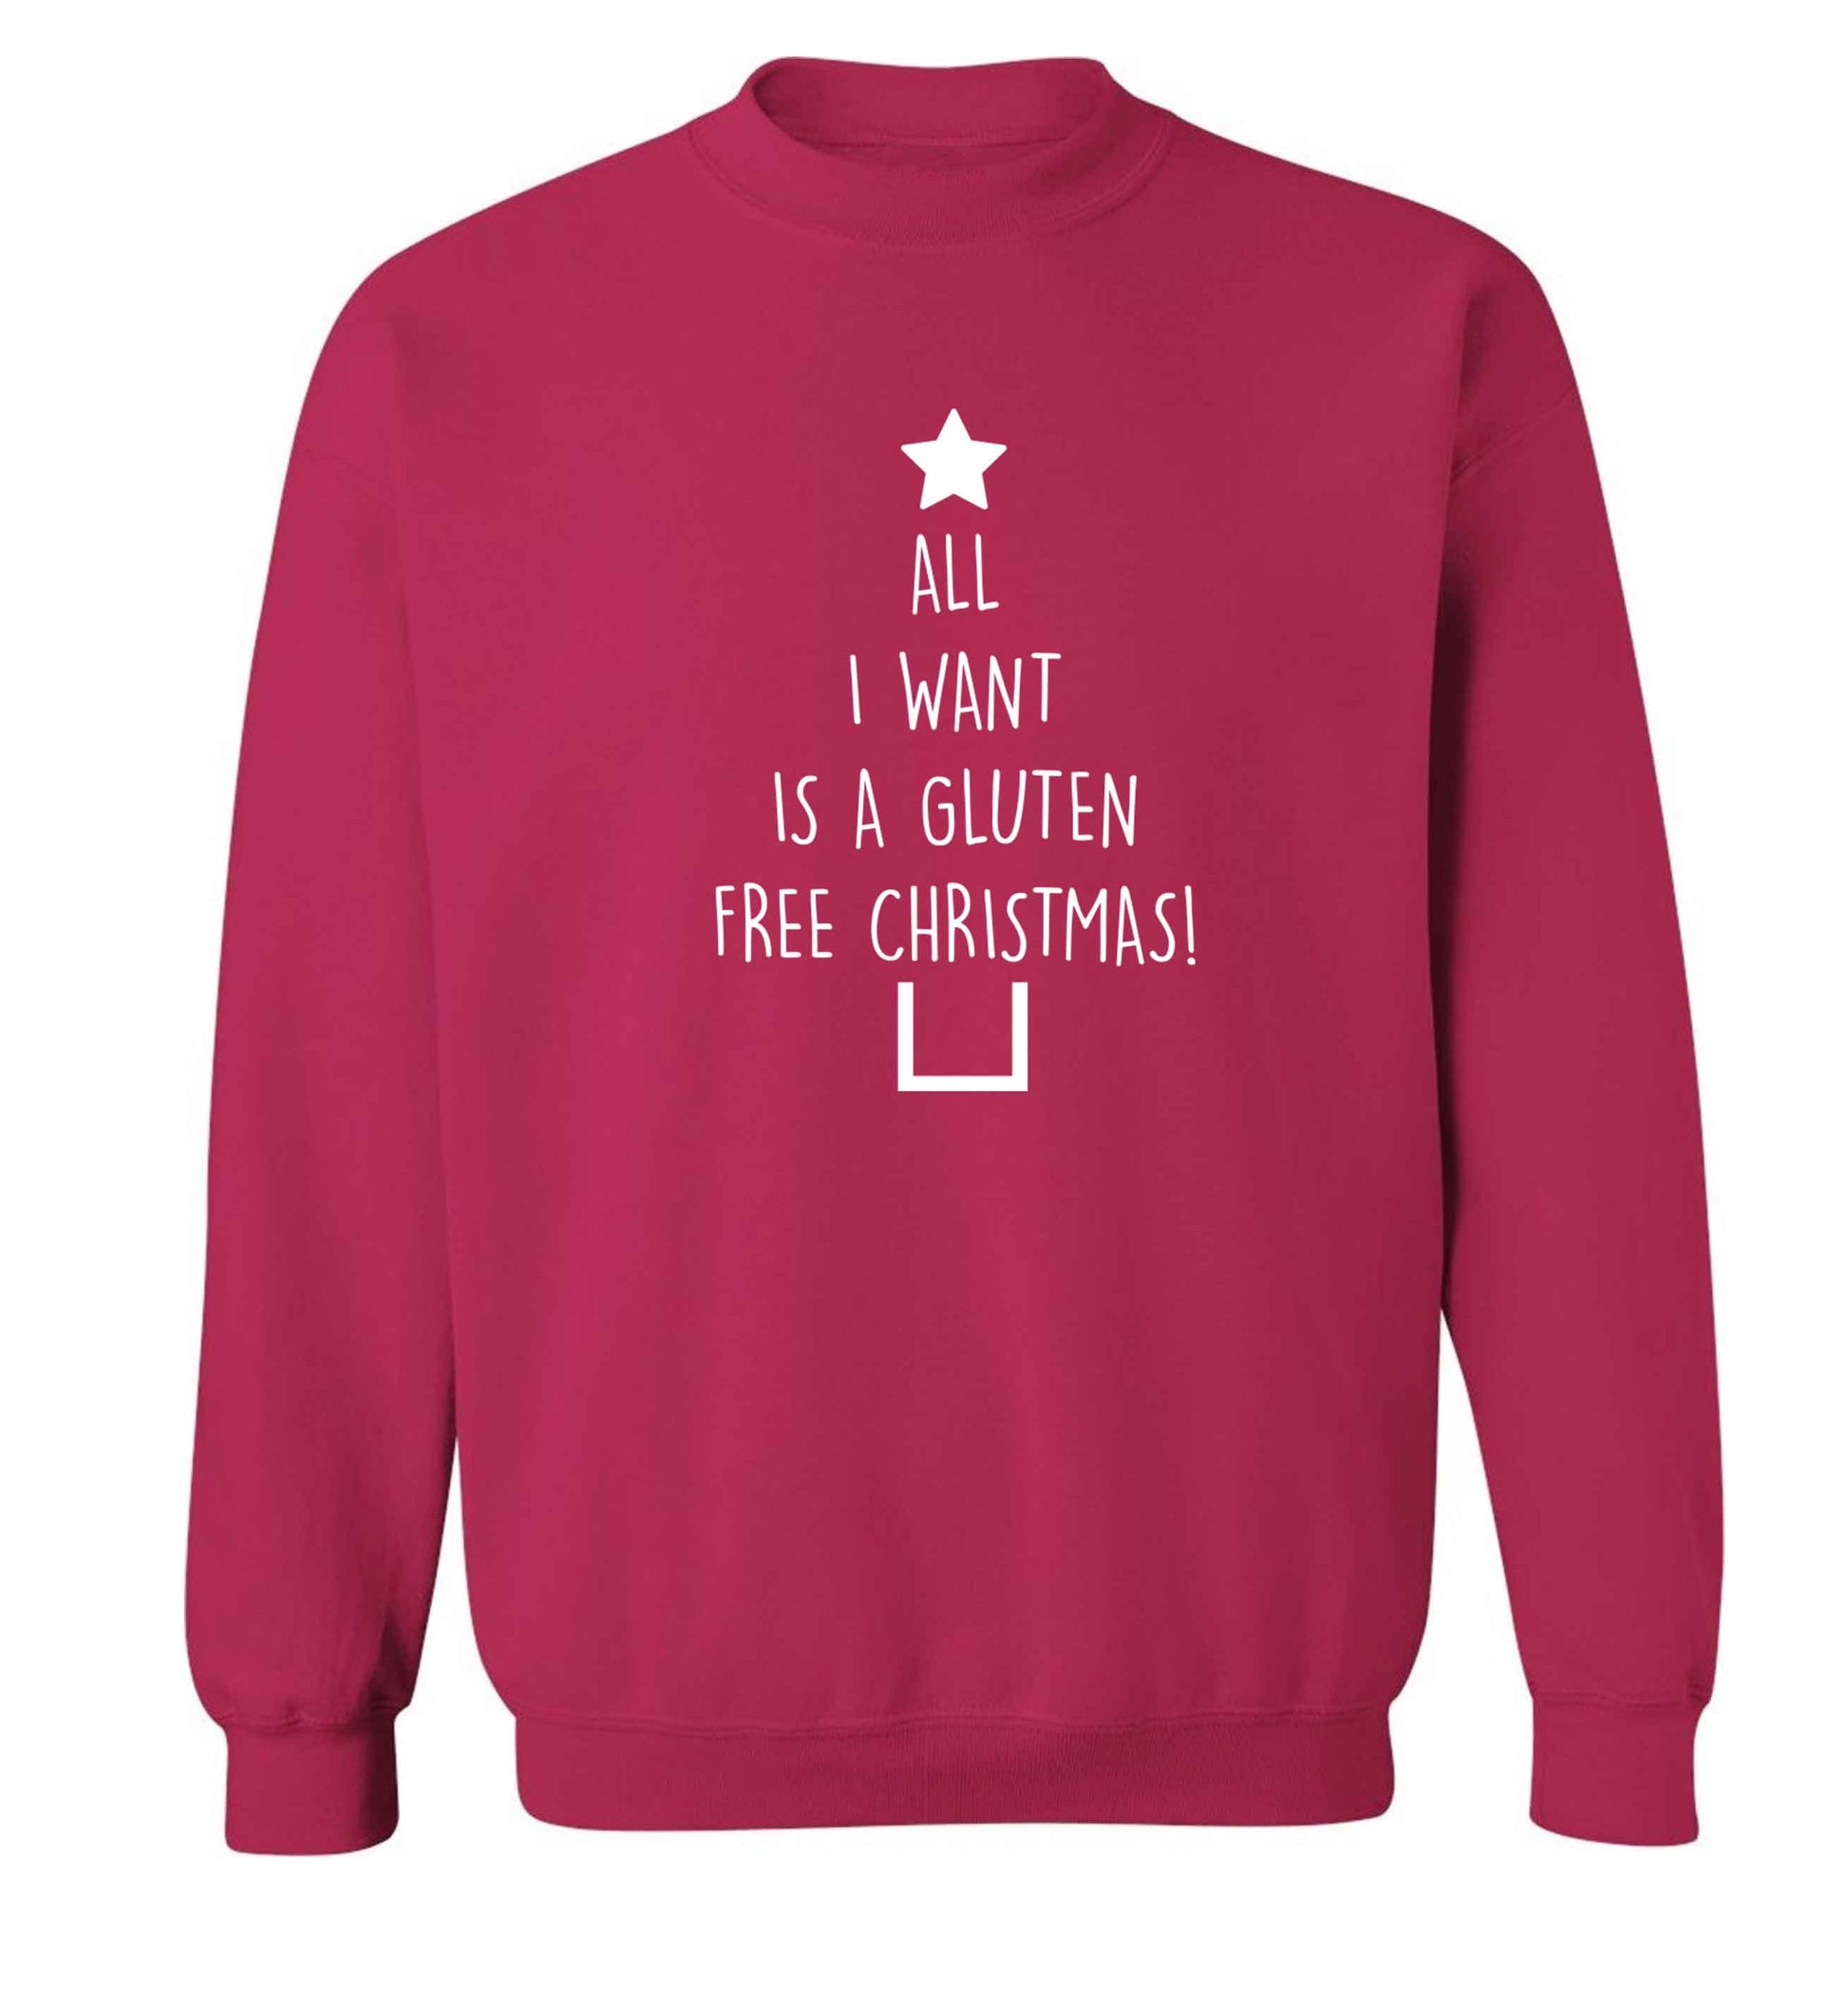 All I want is a gluten free Christmas Adult's unisex pink Sweater 2XL